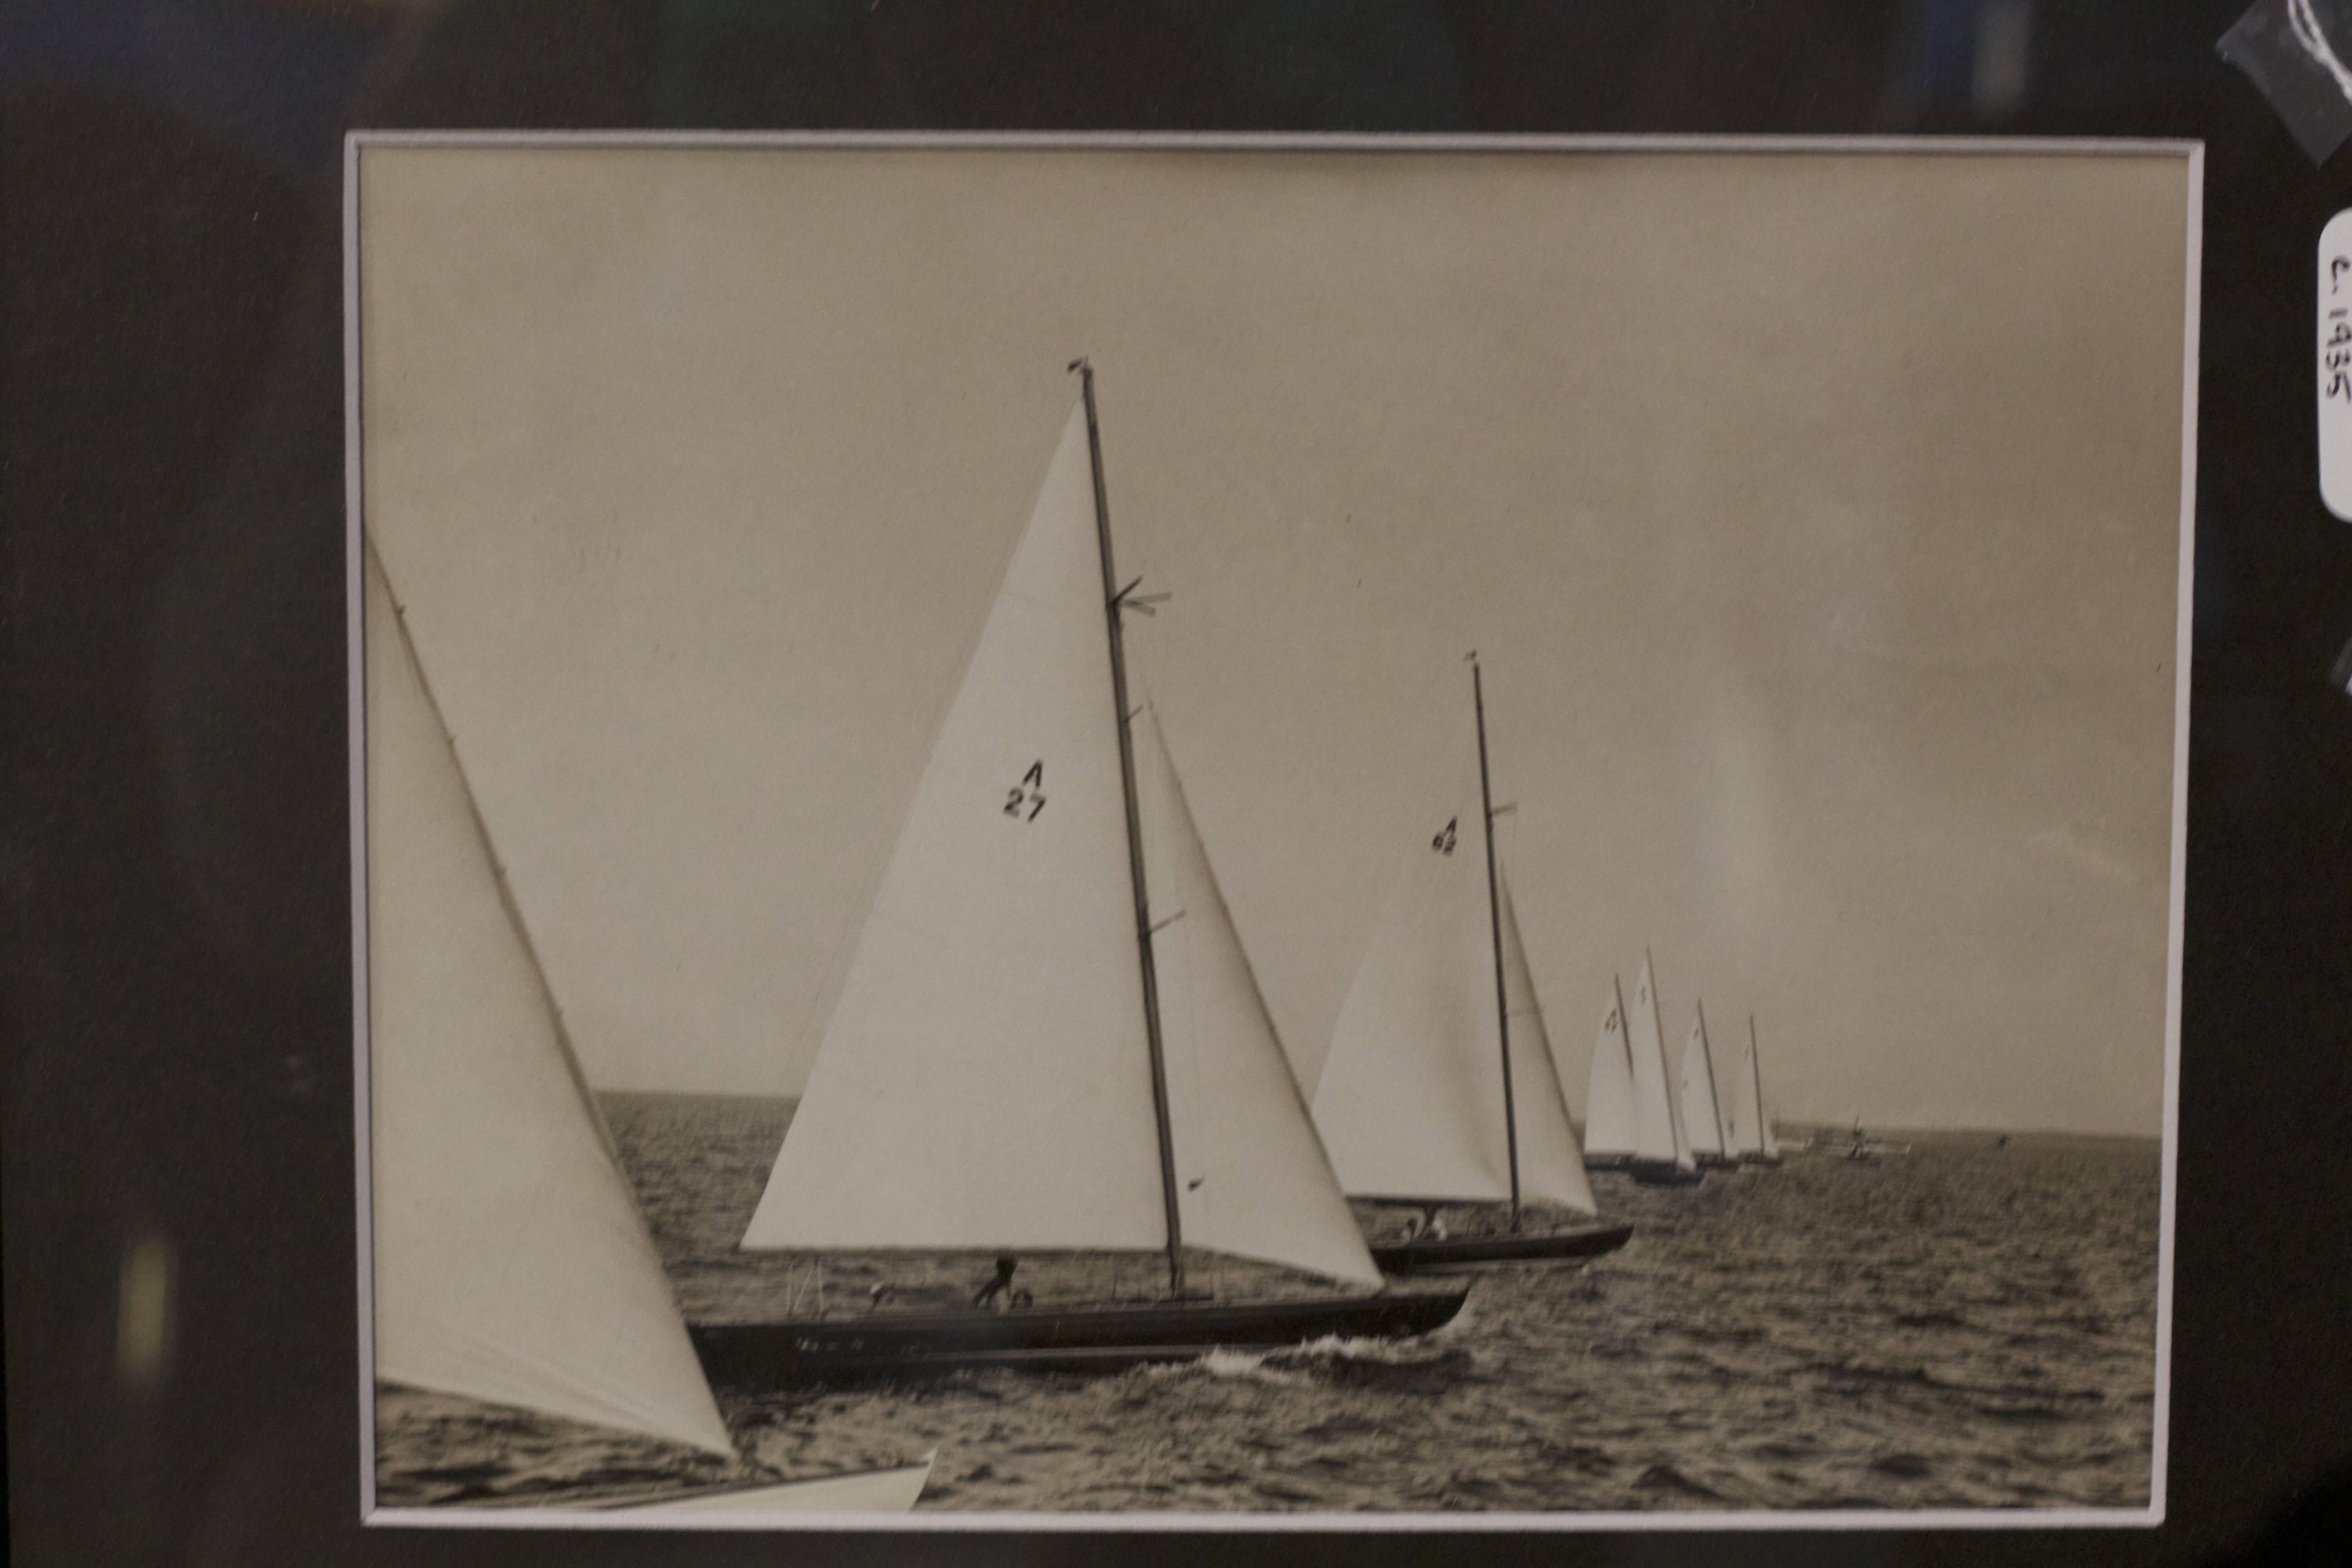 An original press photo of A-Class yachts in a race, circa 1935. Matted and framed. Dimensions: 12" H x 14" L.